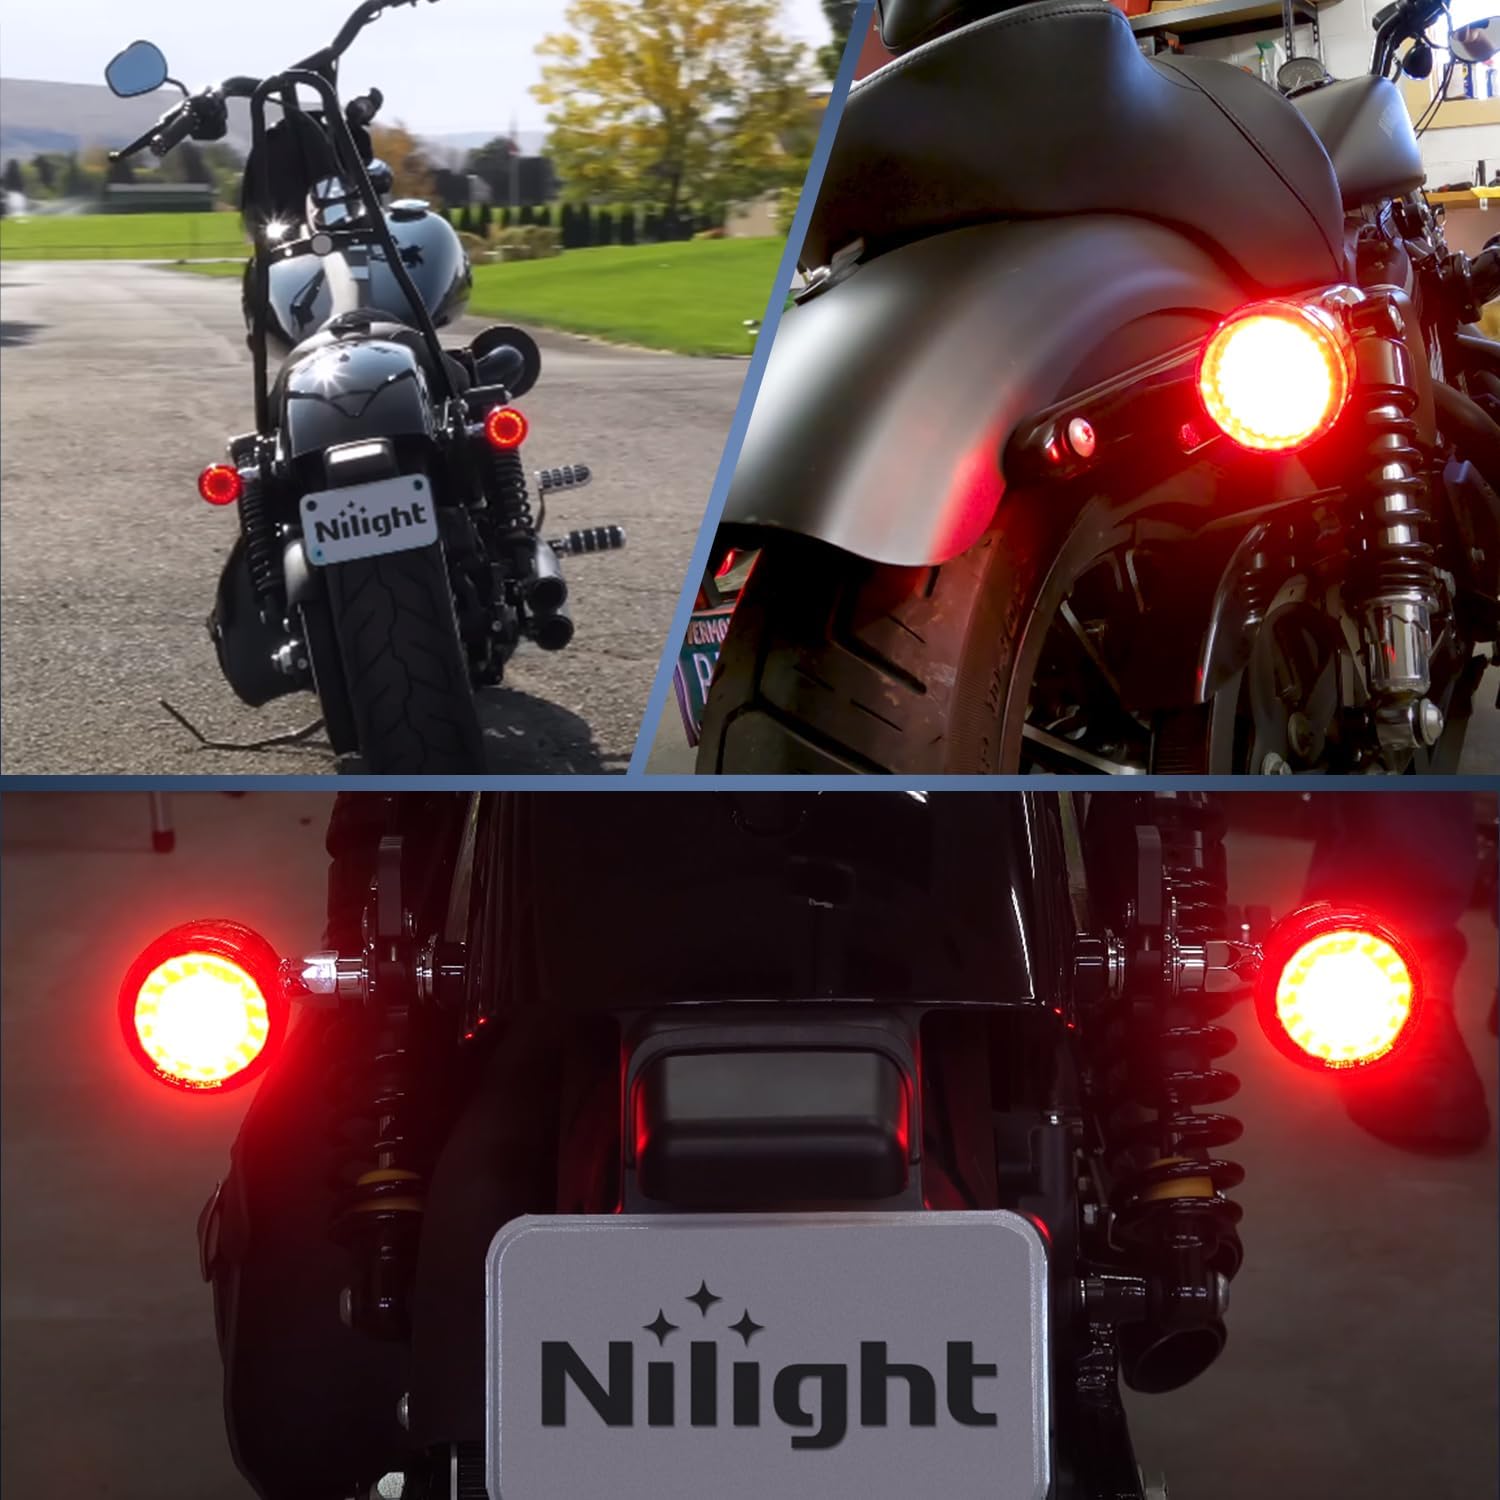 LED Turn Signal Rear Brake Running Lights 1157 Double Contacts Plug and Play For Harley Davidson Dyna Sportster Touring Street Glide Road Glide Road King Iron 883 Nilight